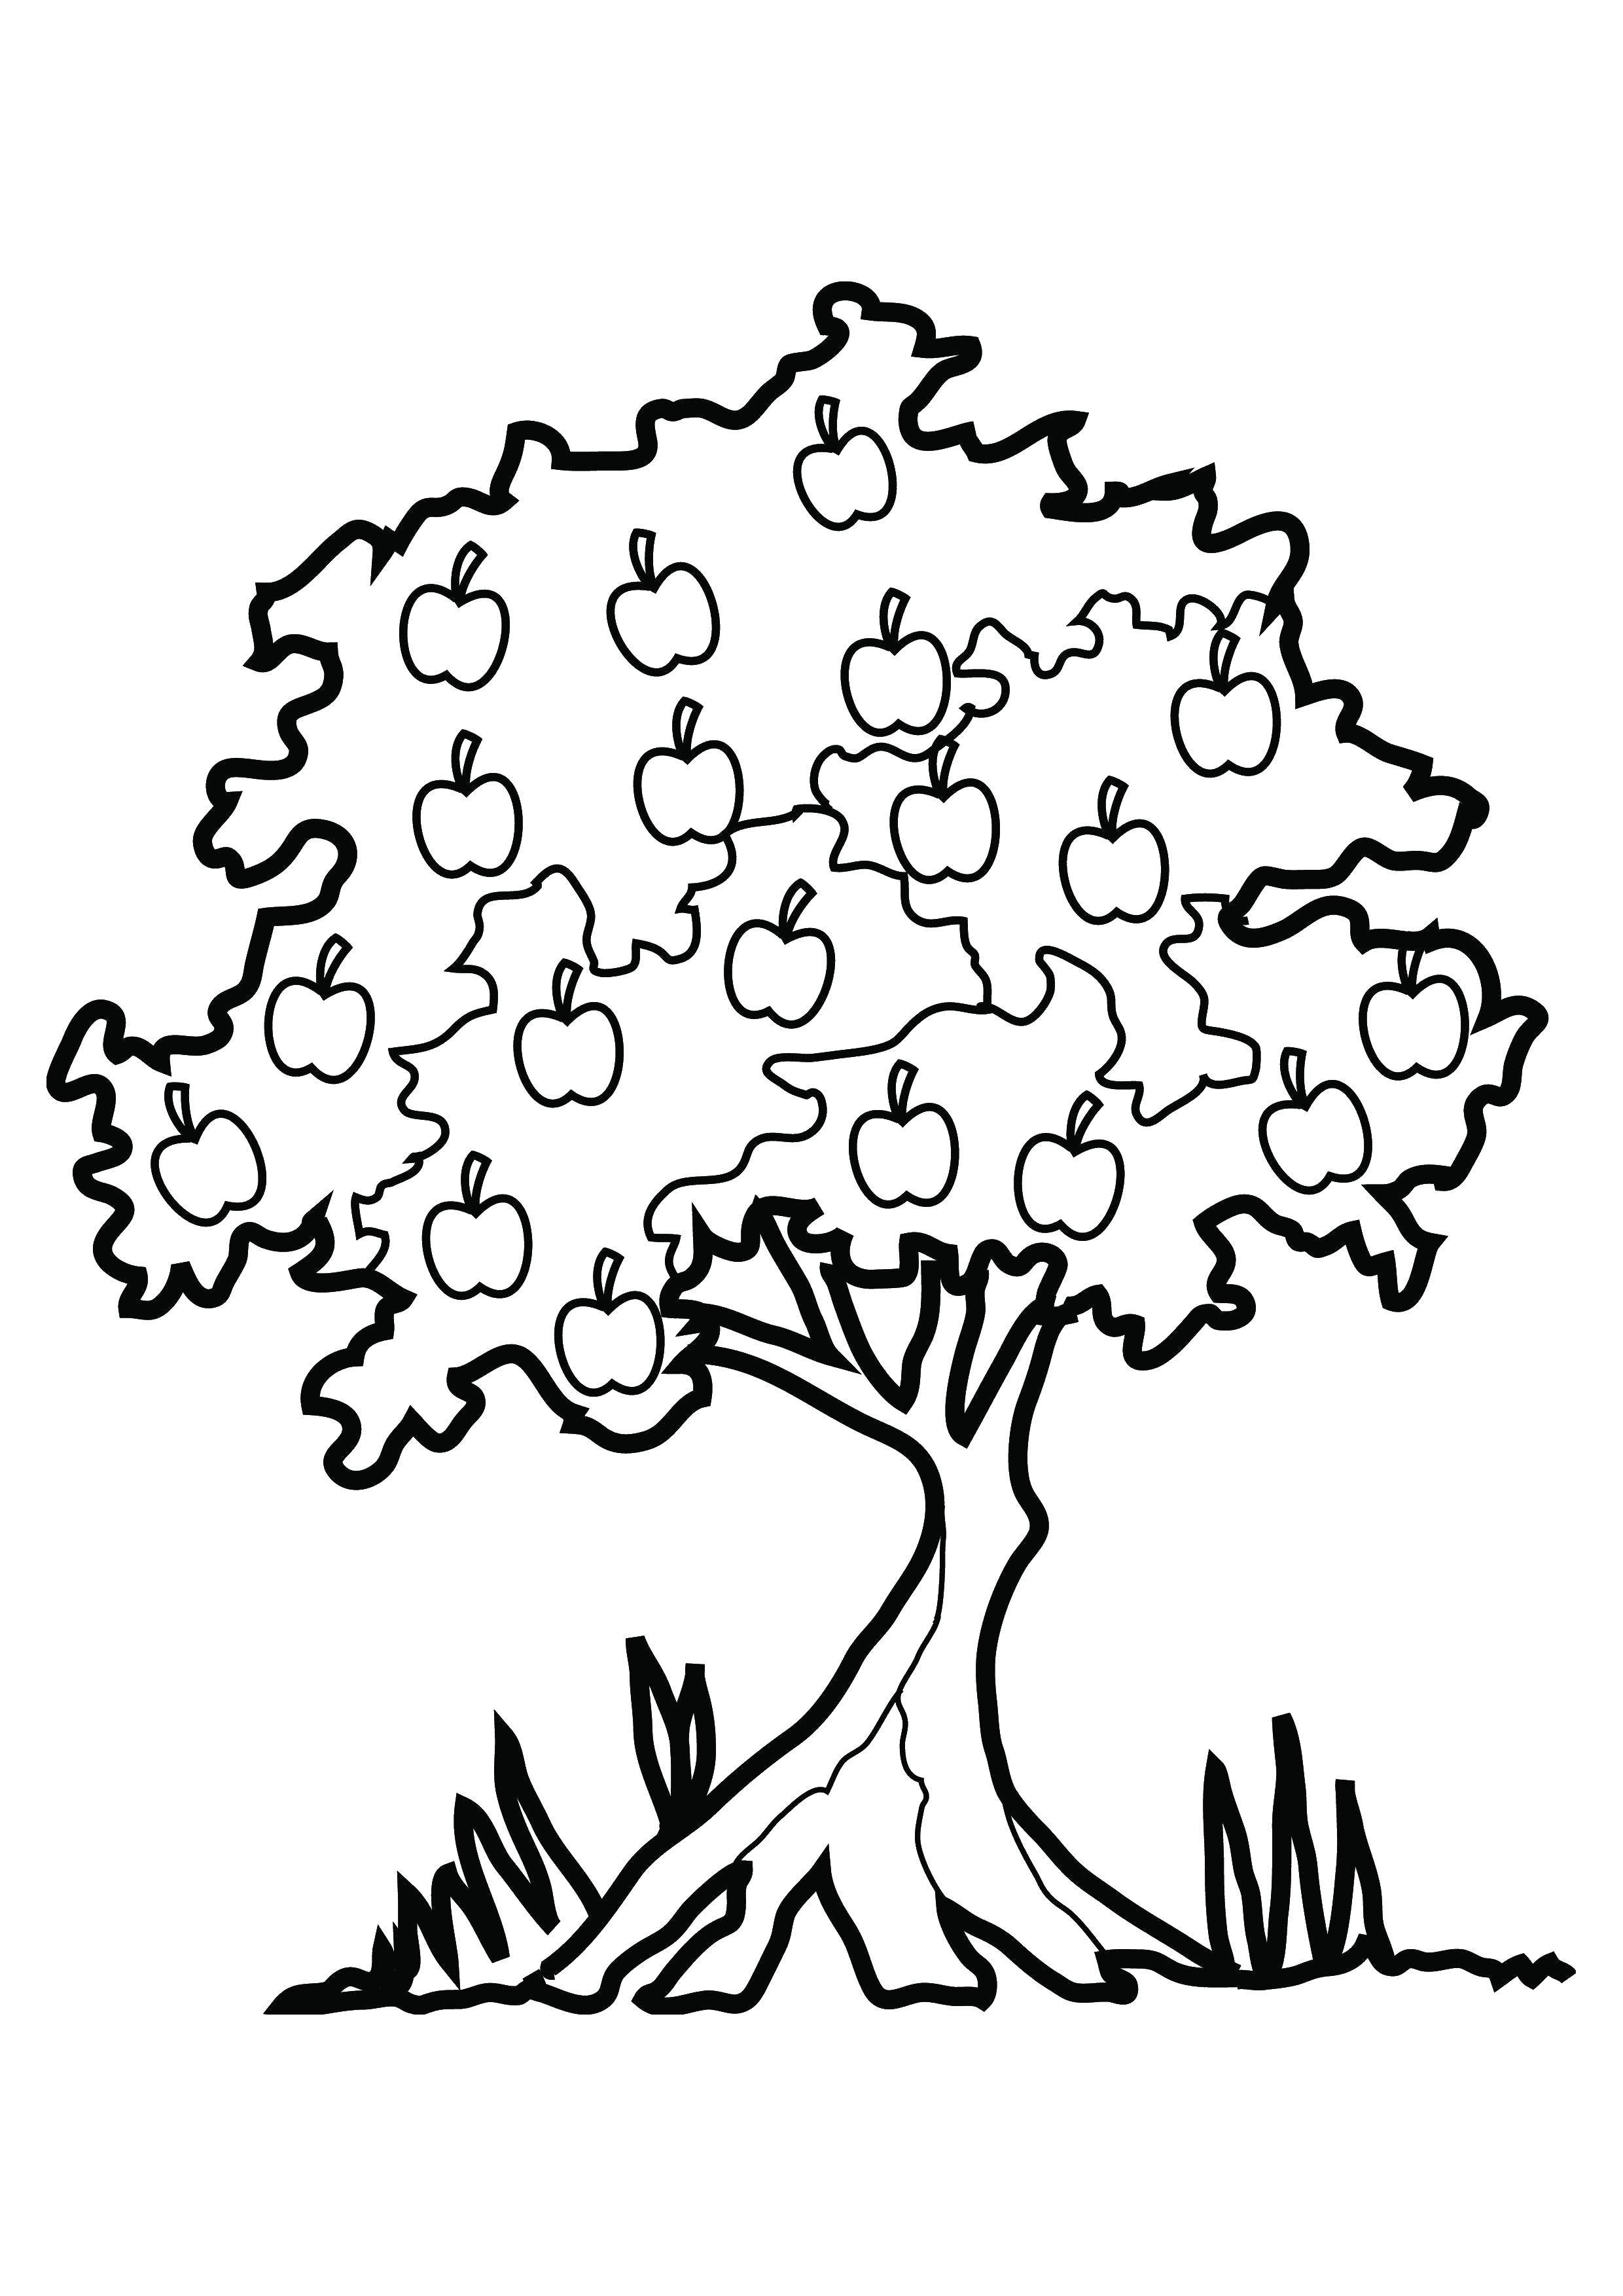 Coloring The Apple tree and the grass. Category The contours of fruit. Tags:  Apple, Apple, grass.